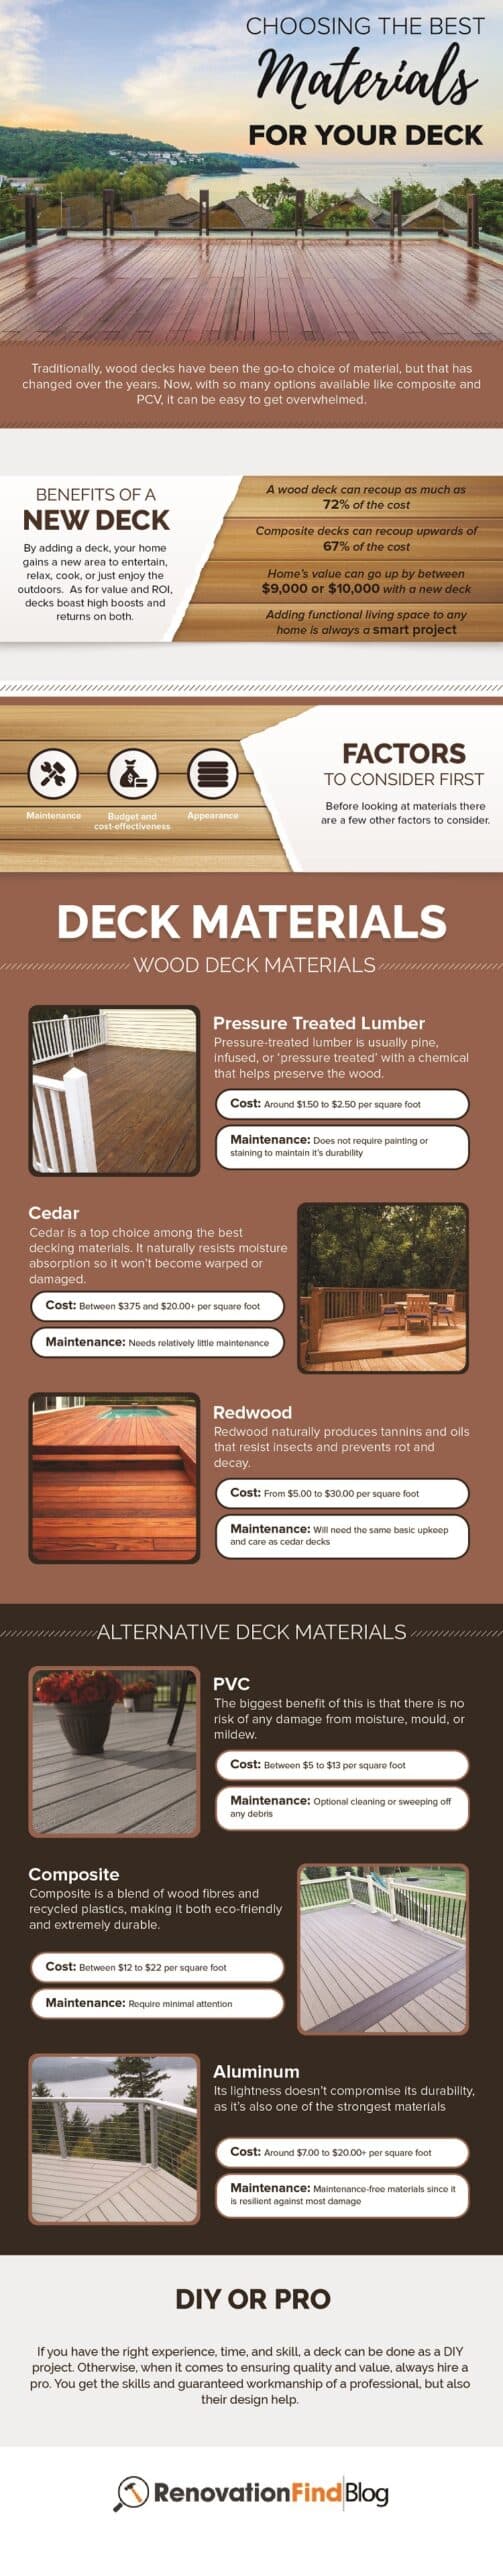 Infographic - Choosing the best materials for your deck